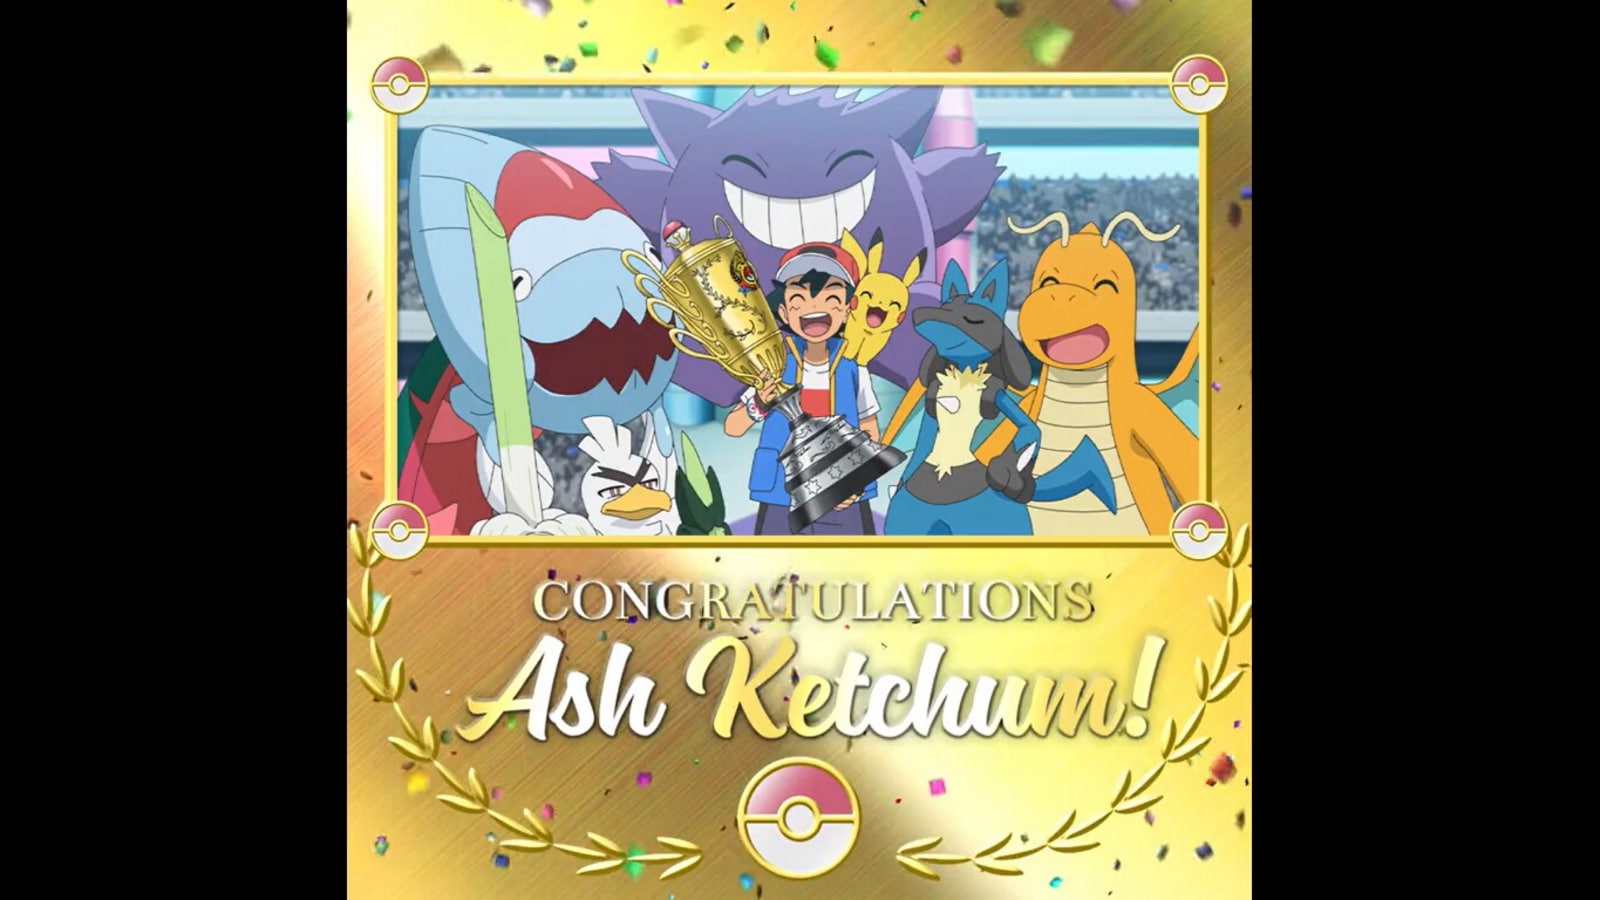 After 25 Years, Pokemon's Ash Ketchum Becomes World Champion